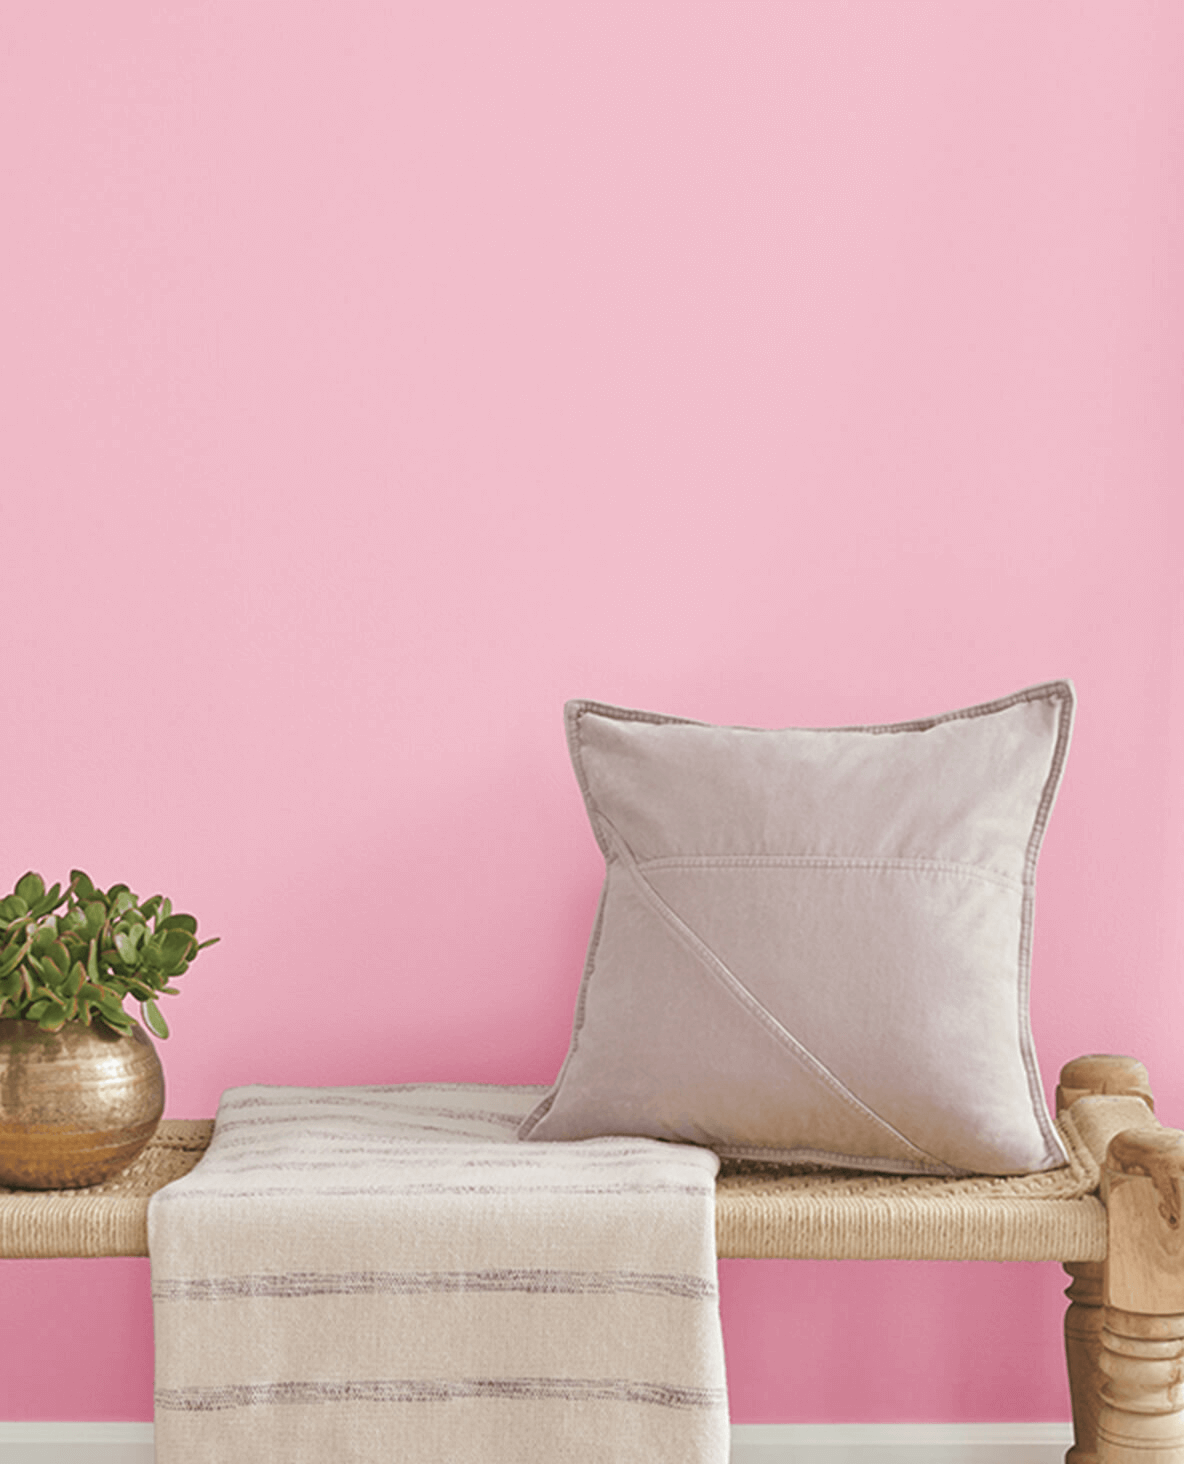 Sherwin Williams SW6853 Fussy Pink Precisely Matched For Paint and Spray  Paint